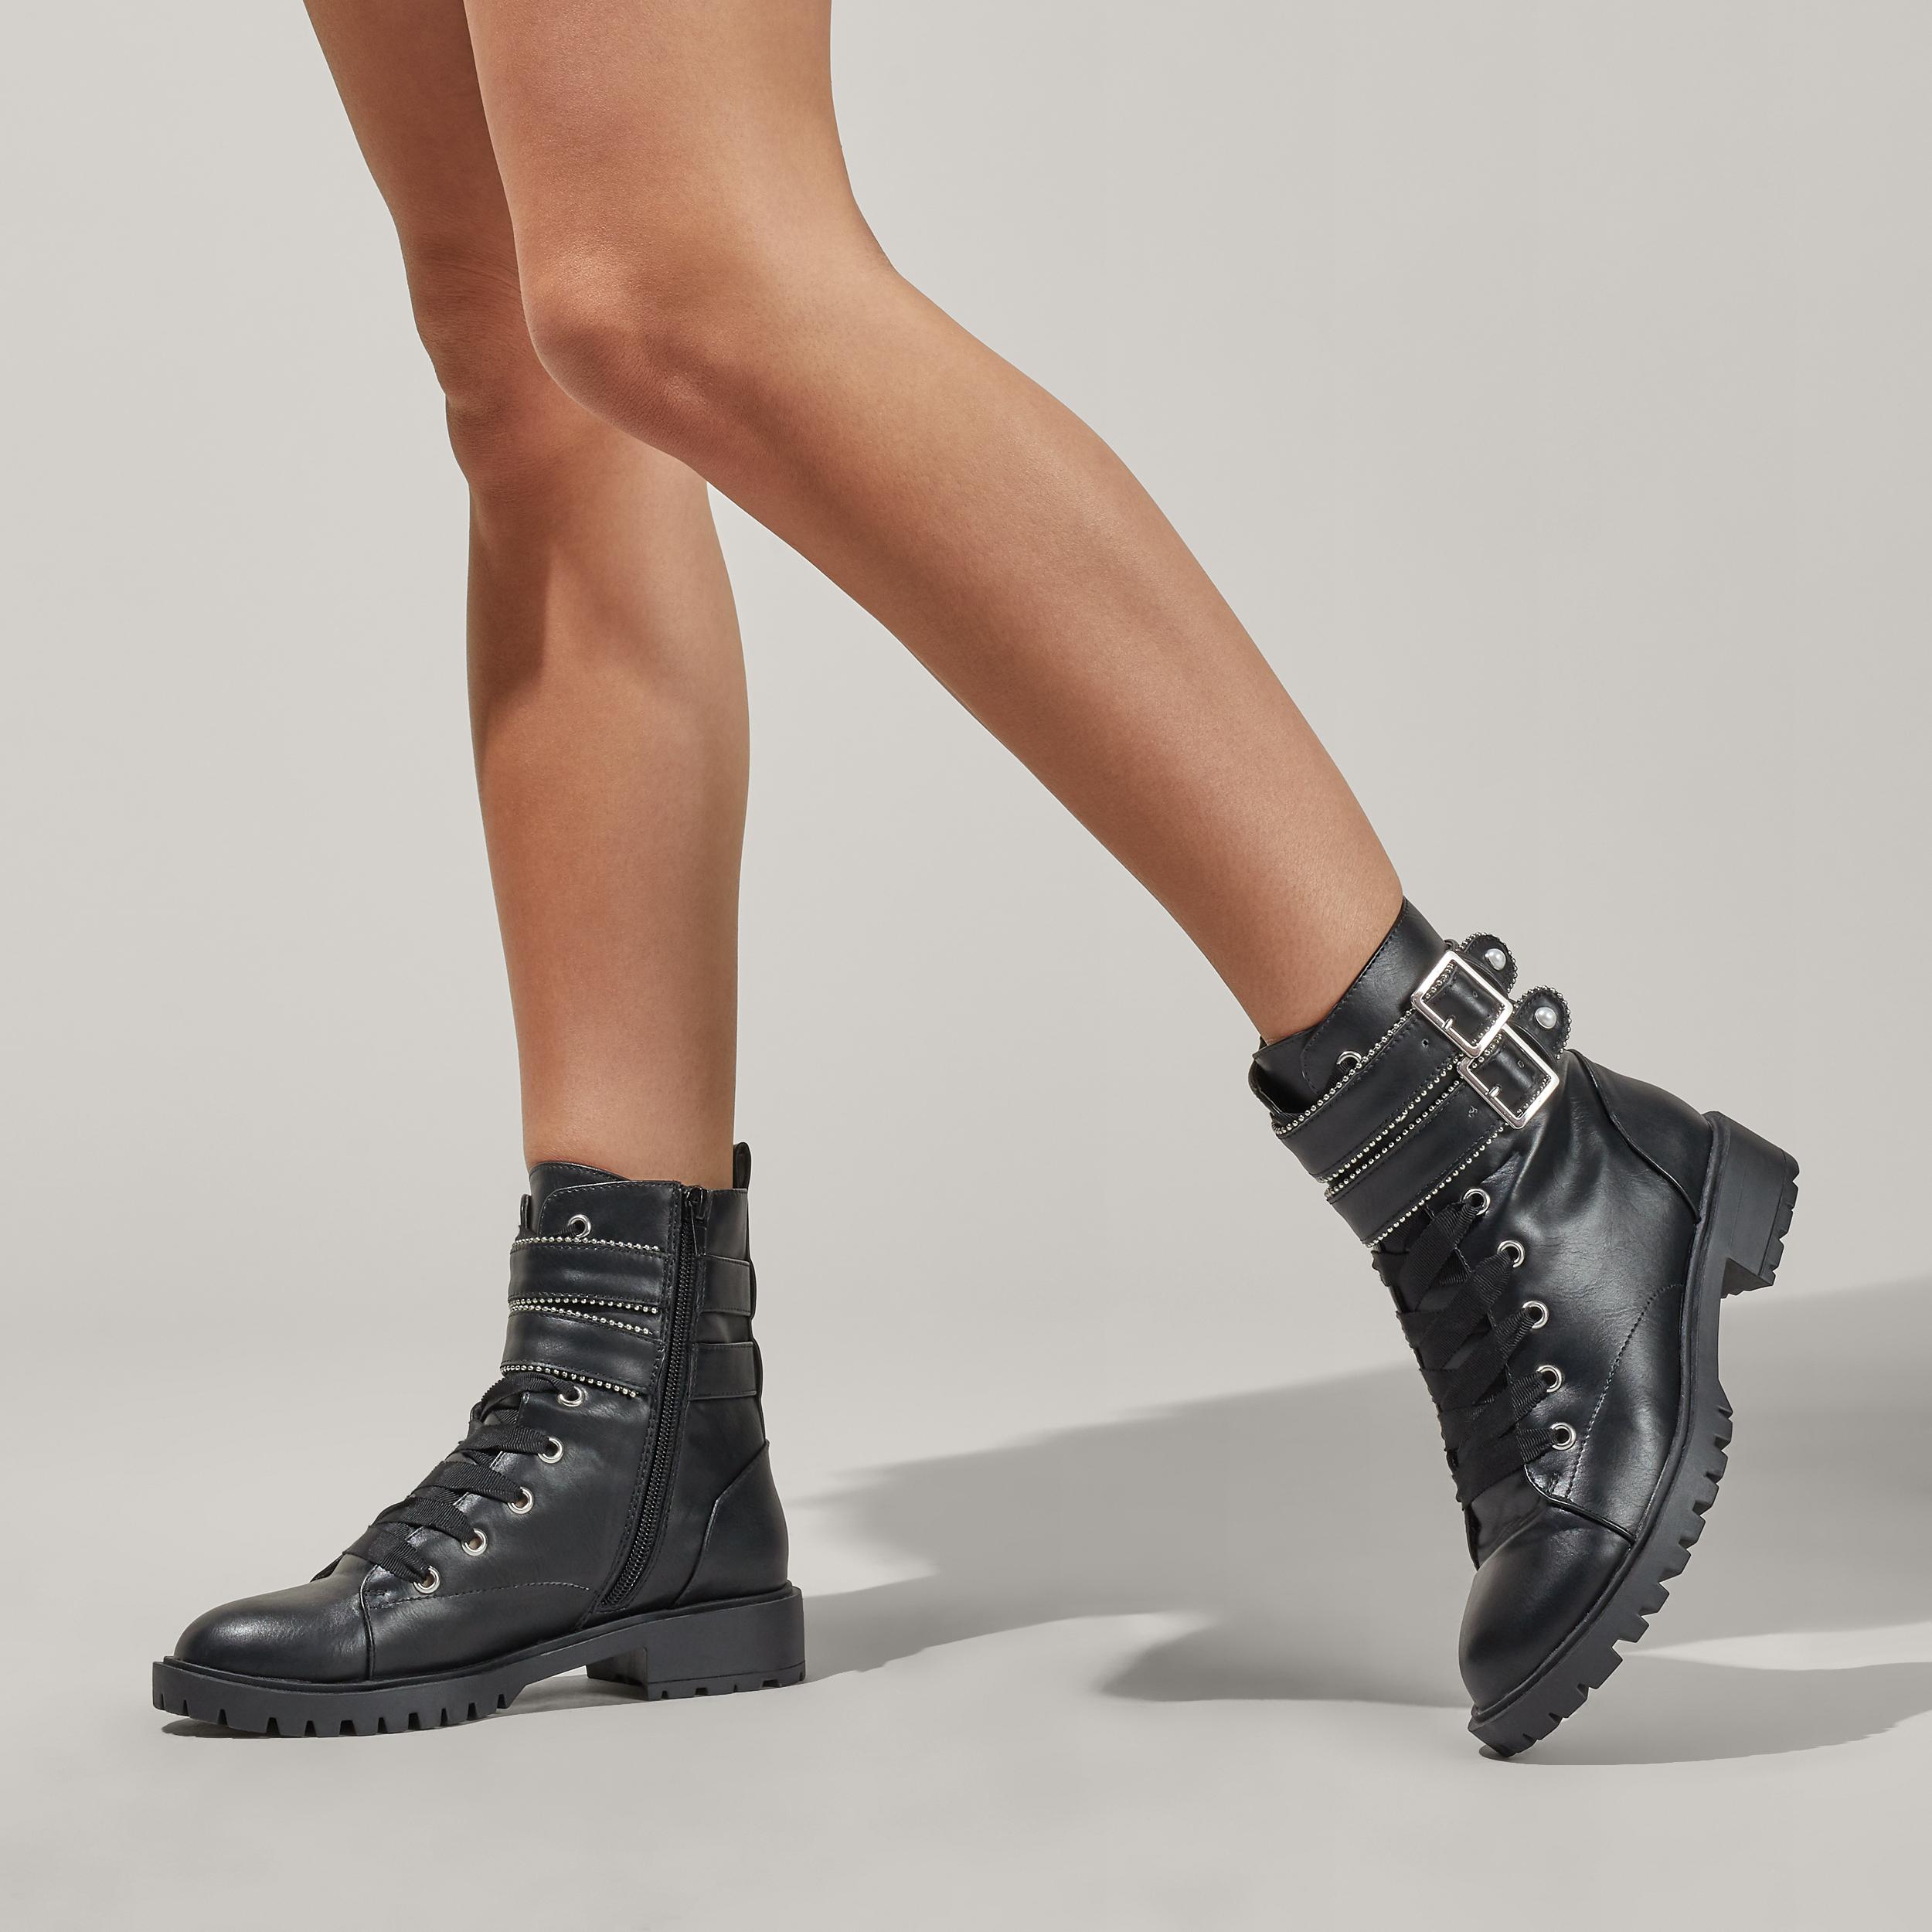 HIPPY - MISS KG Ankle Boots